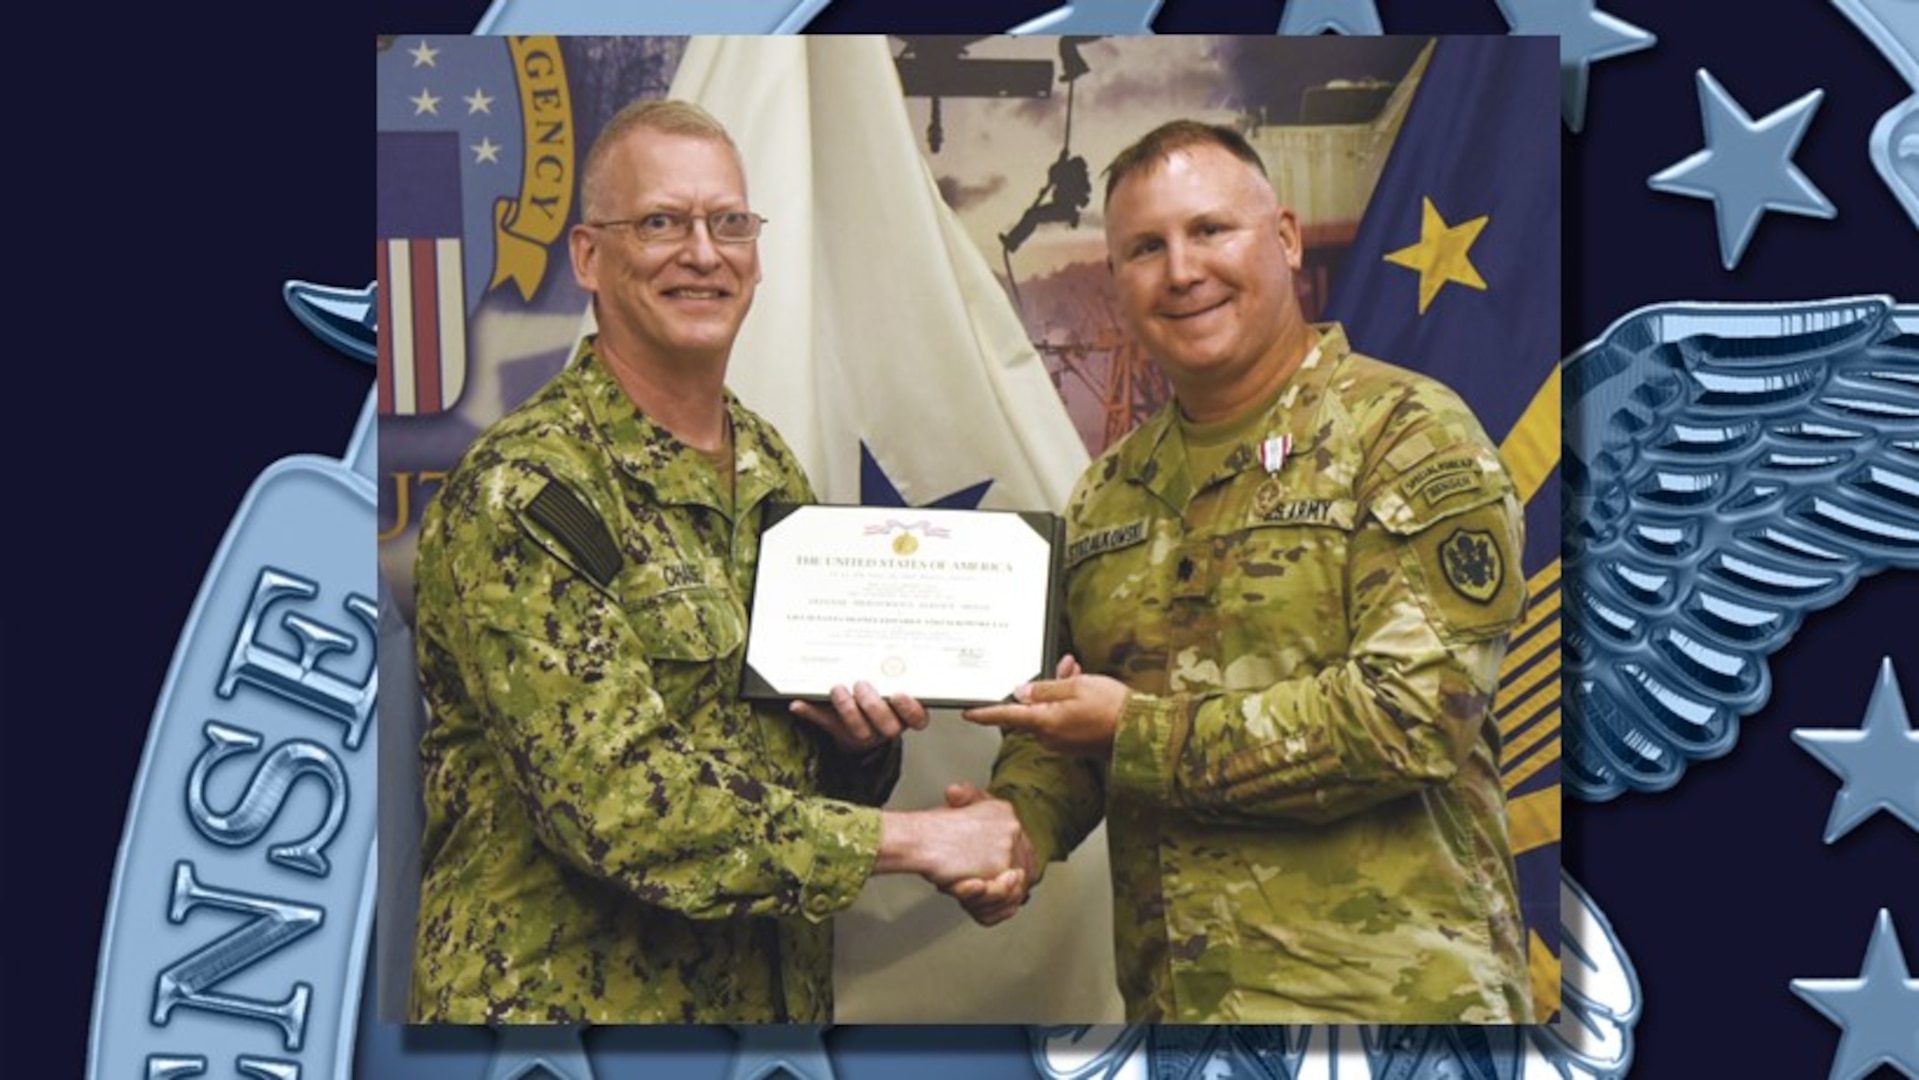 Two men in military uniform standing and holding a certificate between them